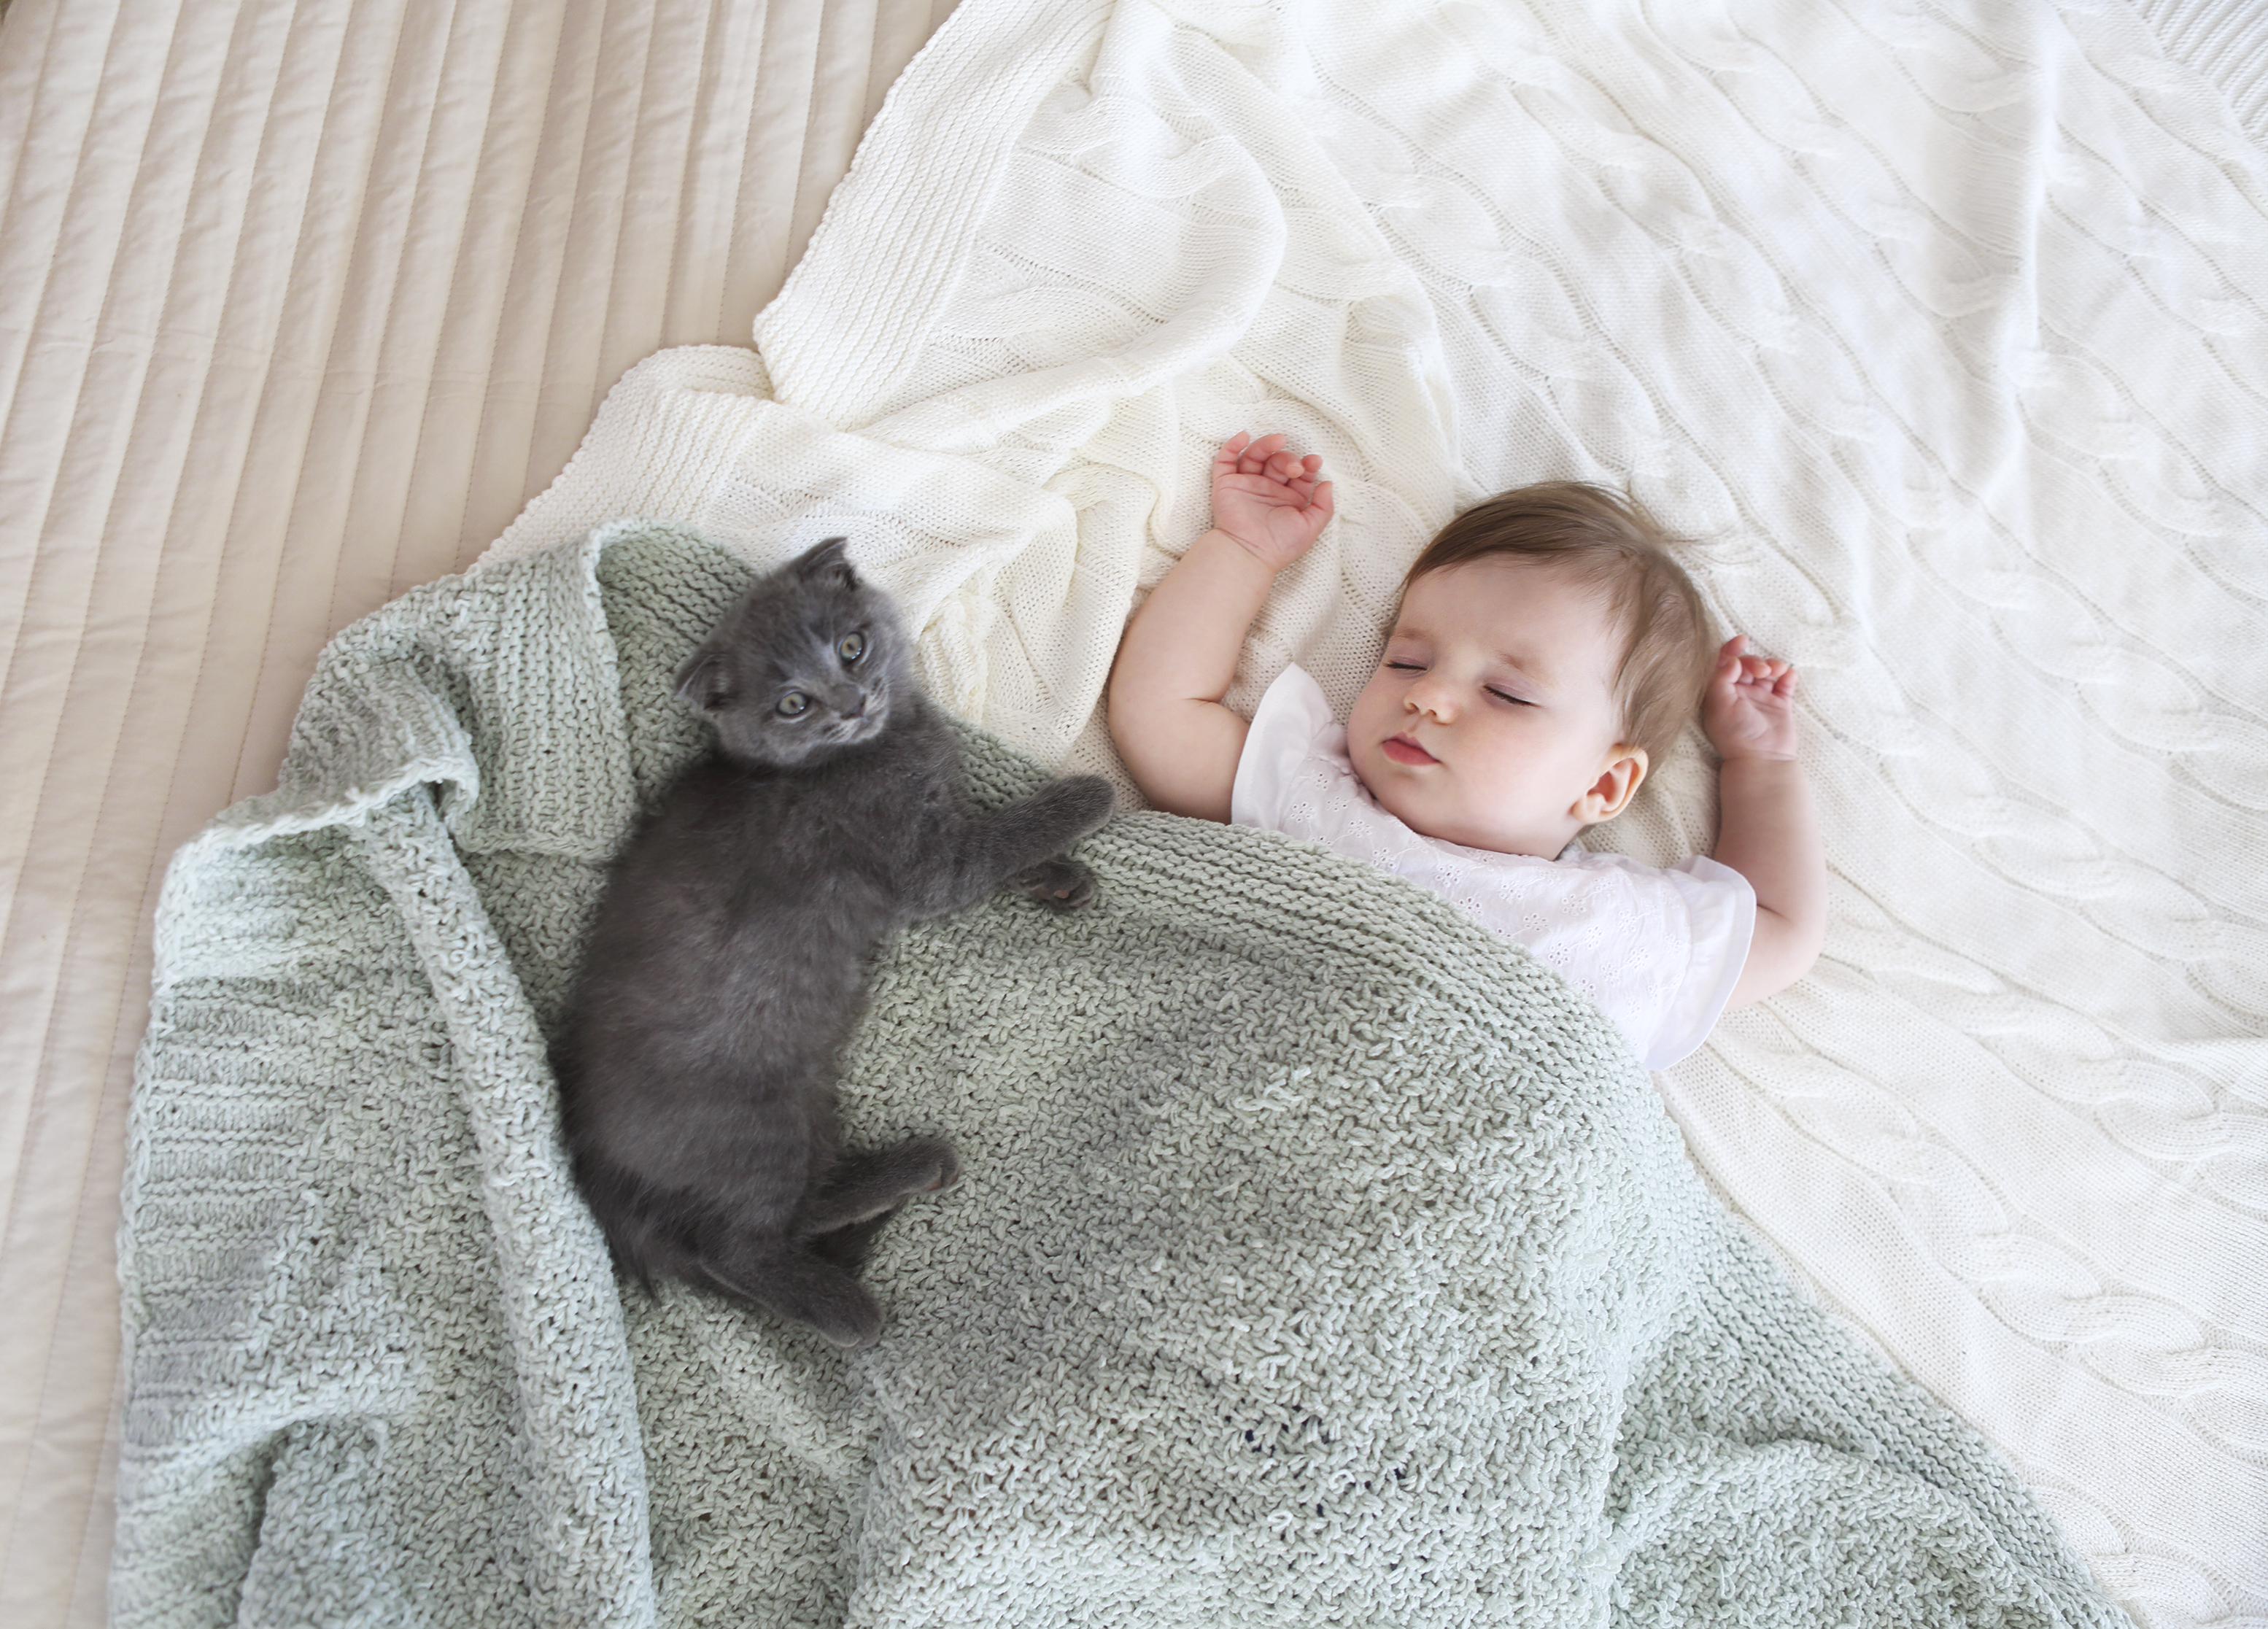 Cat Putting Agitated Baby to Sleep Stuns the Internet